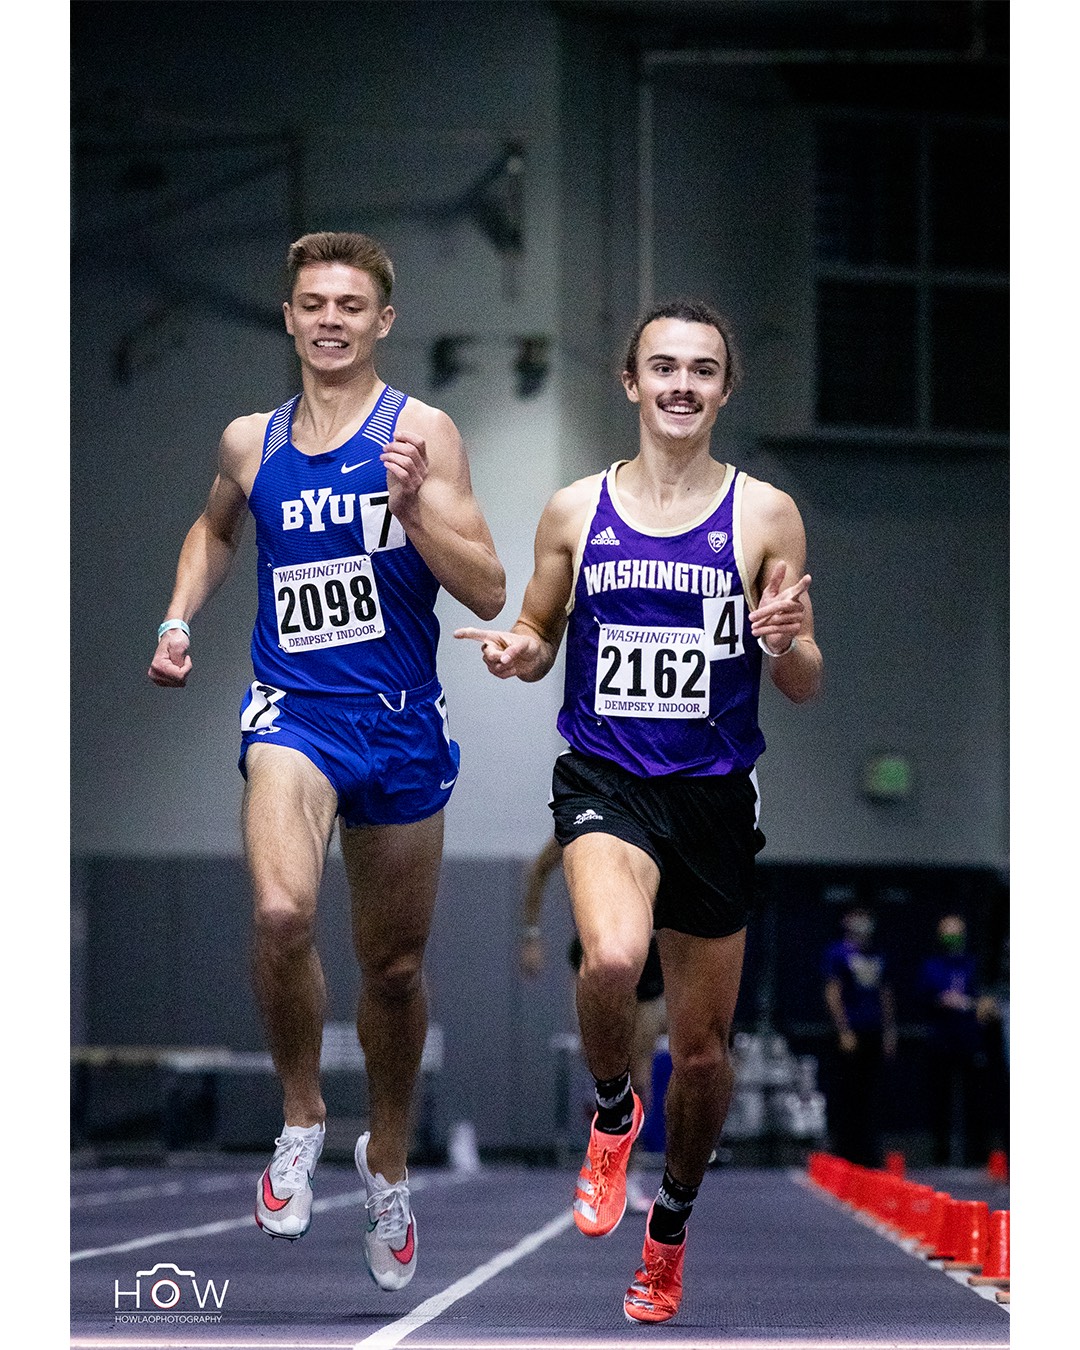 Sam Tanner runs the easiest 355.23 to win Husky Classic mile and get his NCAA qualifier... pic pic